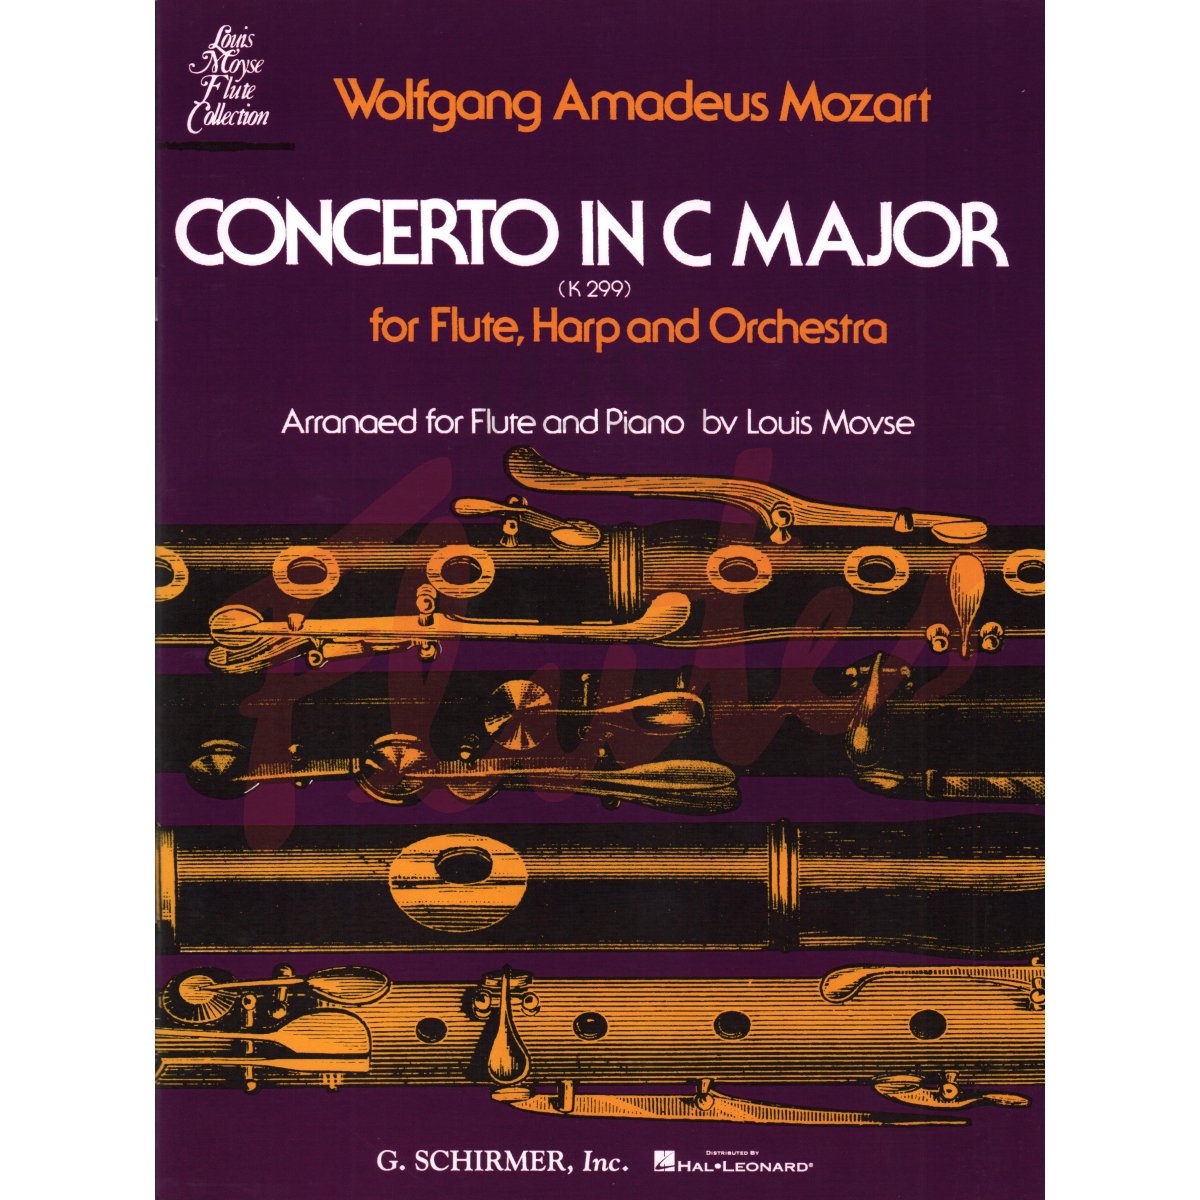 Concerto in C major for Flute and Harp, arranged for Flute and Piano